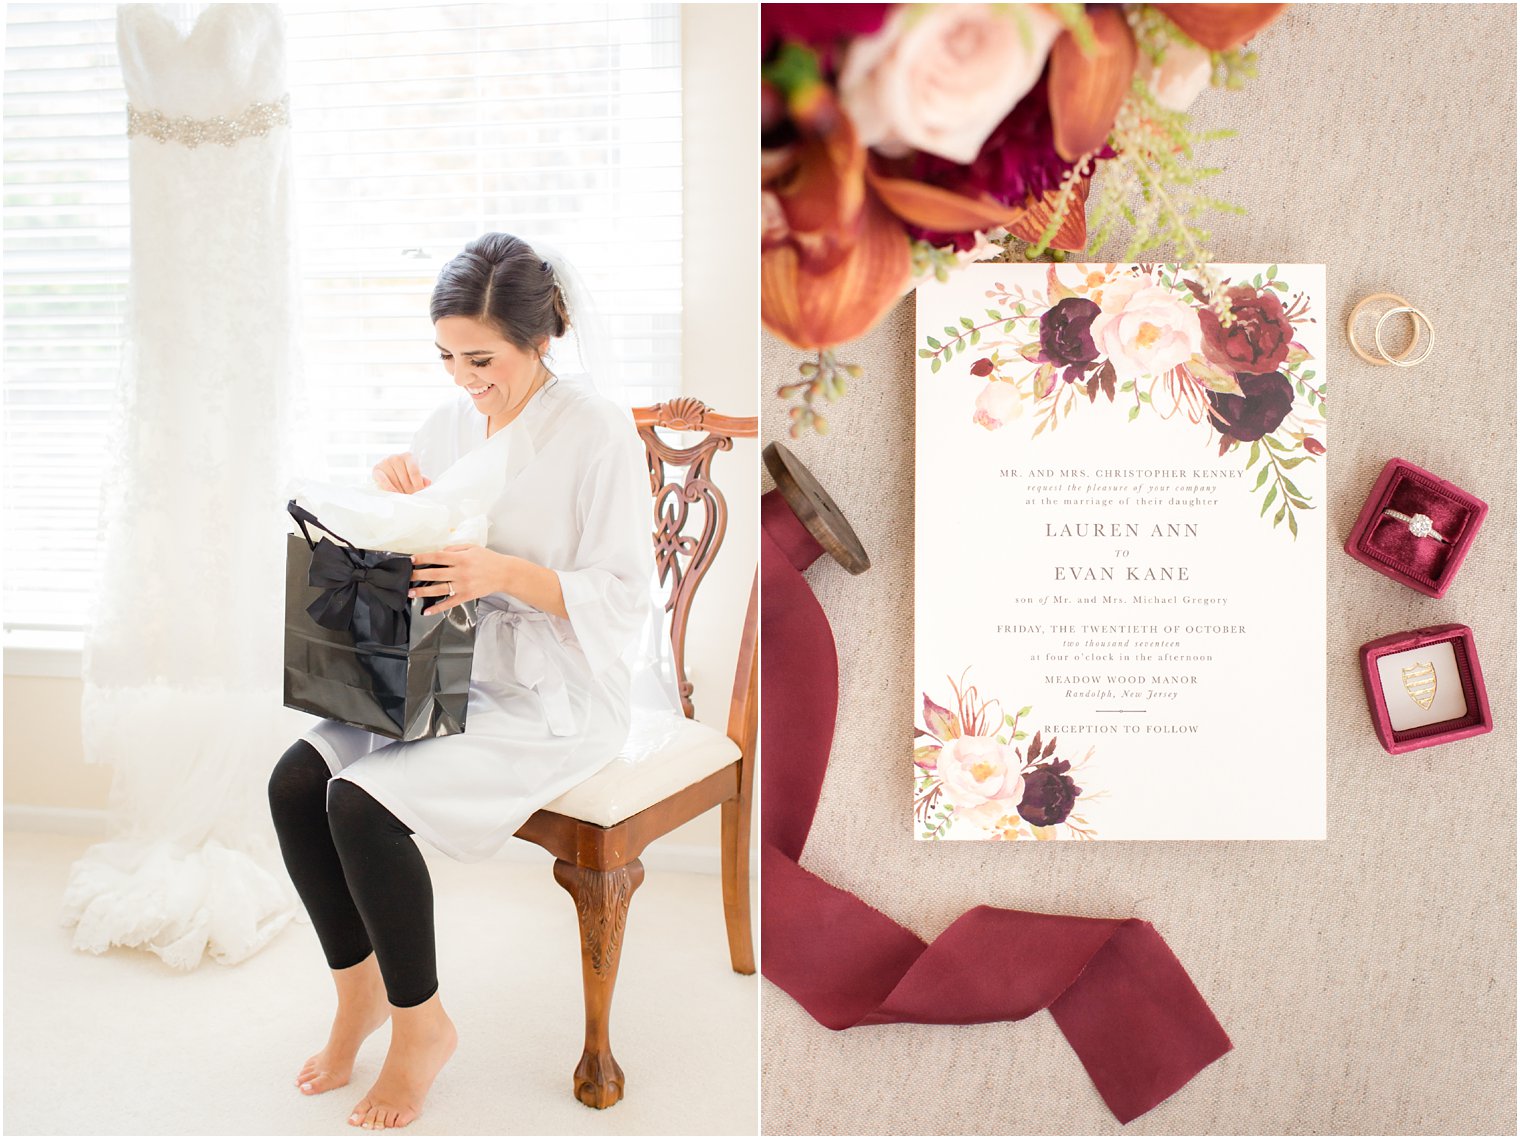 Bride opening gift from her groom and fall wedding invitation with burgundy accent colors